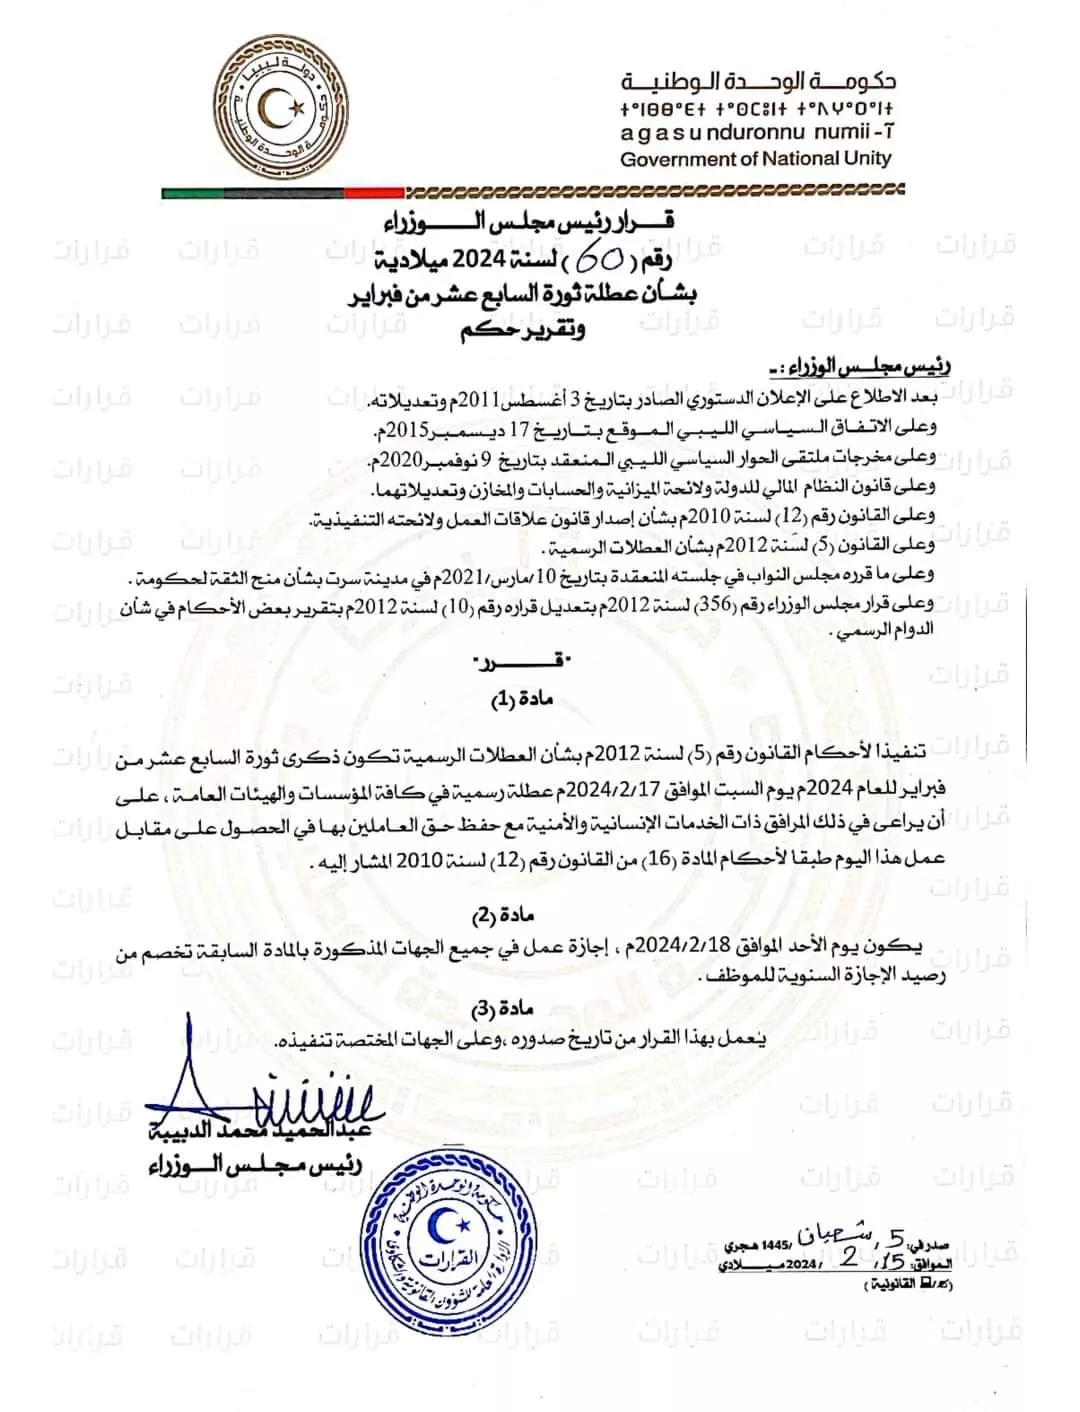 Prime Minister’s Decision No. (60) of 2024 regarding setting an official holiday.  #Libya #National_Unity_Government